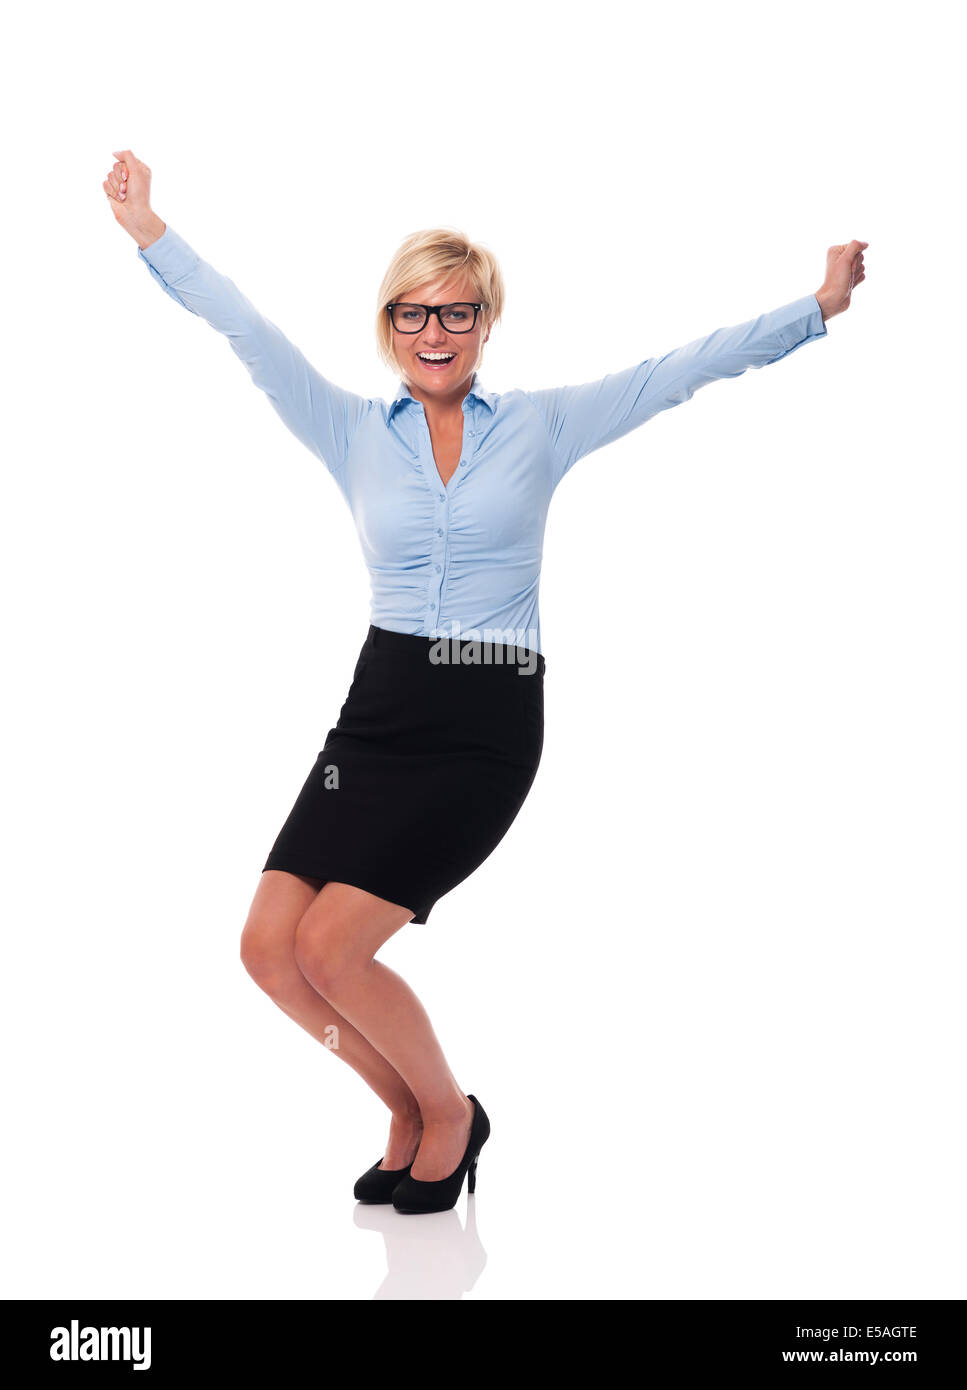 Excited young businesswoman with hands raised, Debica, Poland Stock Photo